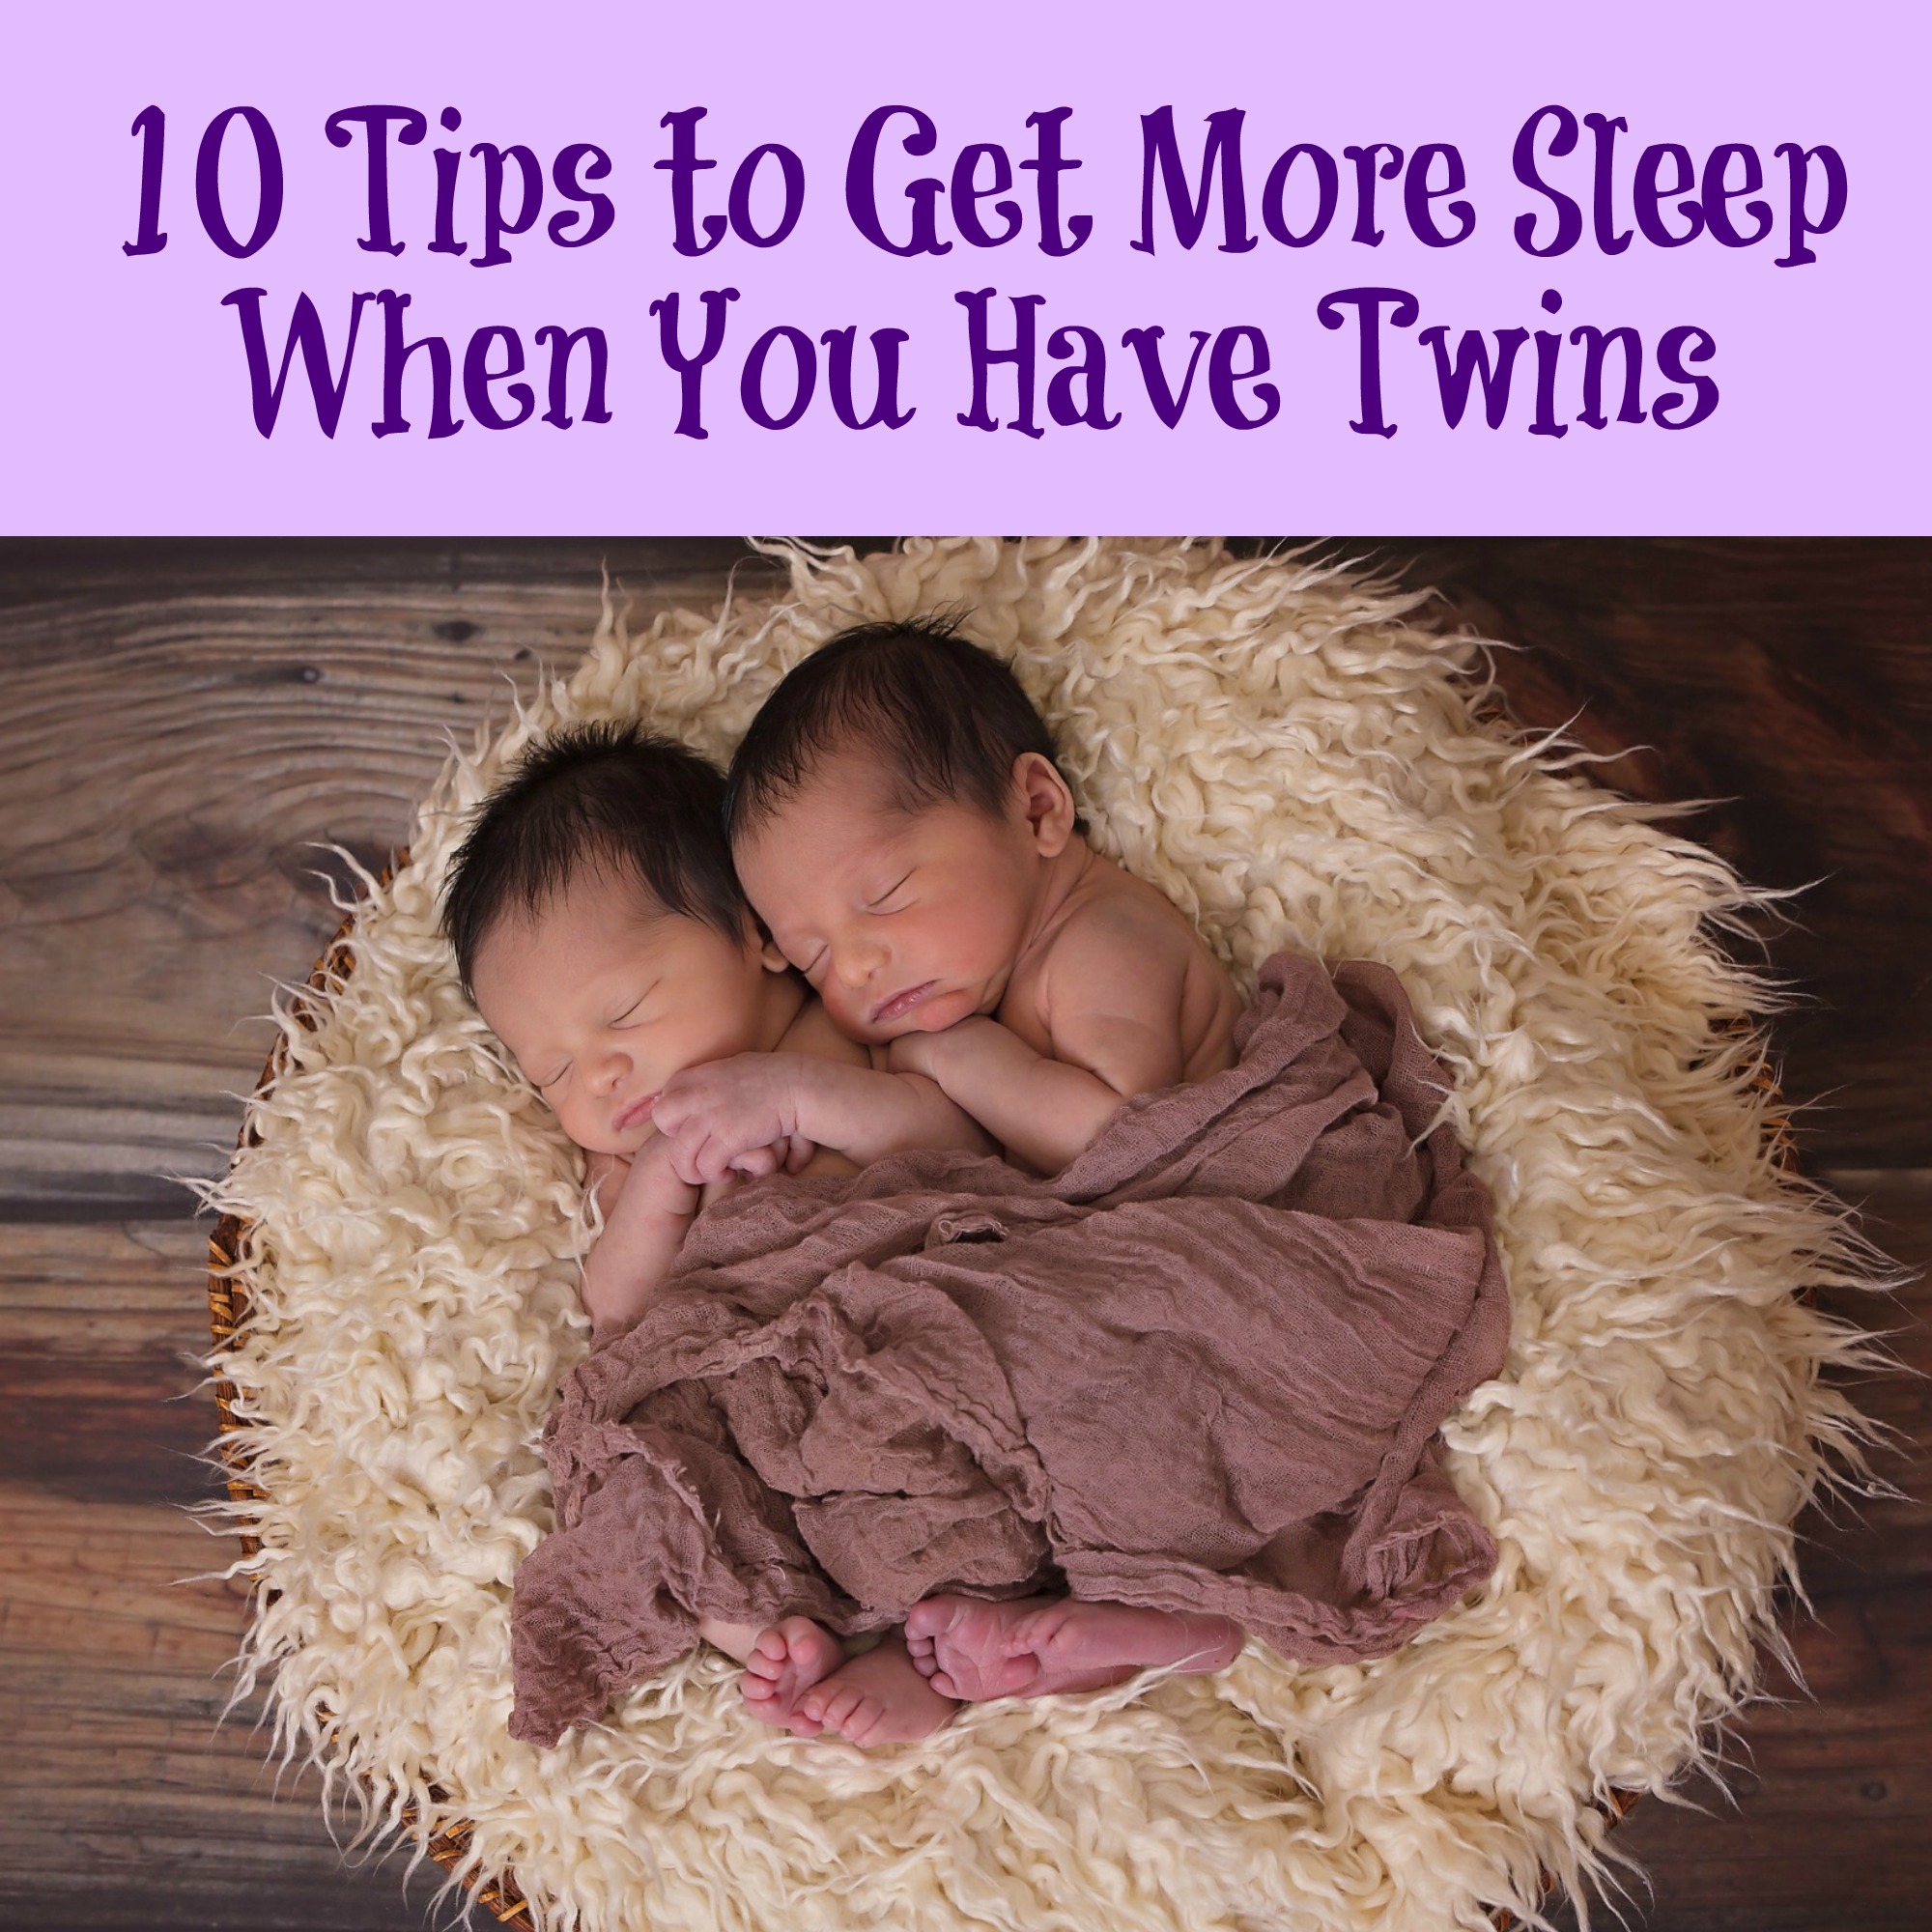 10 Tips to Get More Sleep When You Have Twins